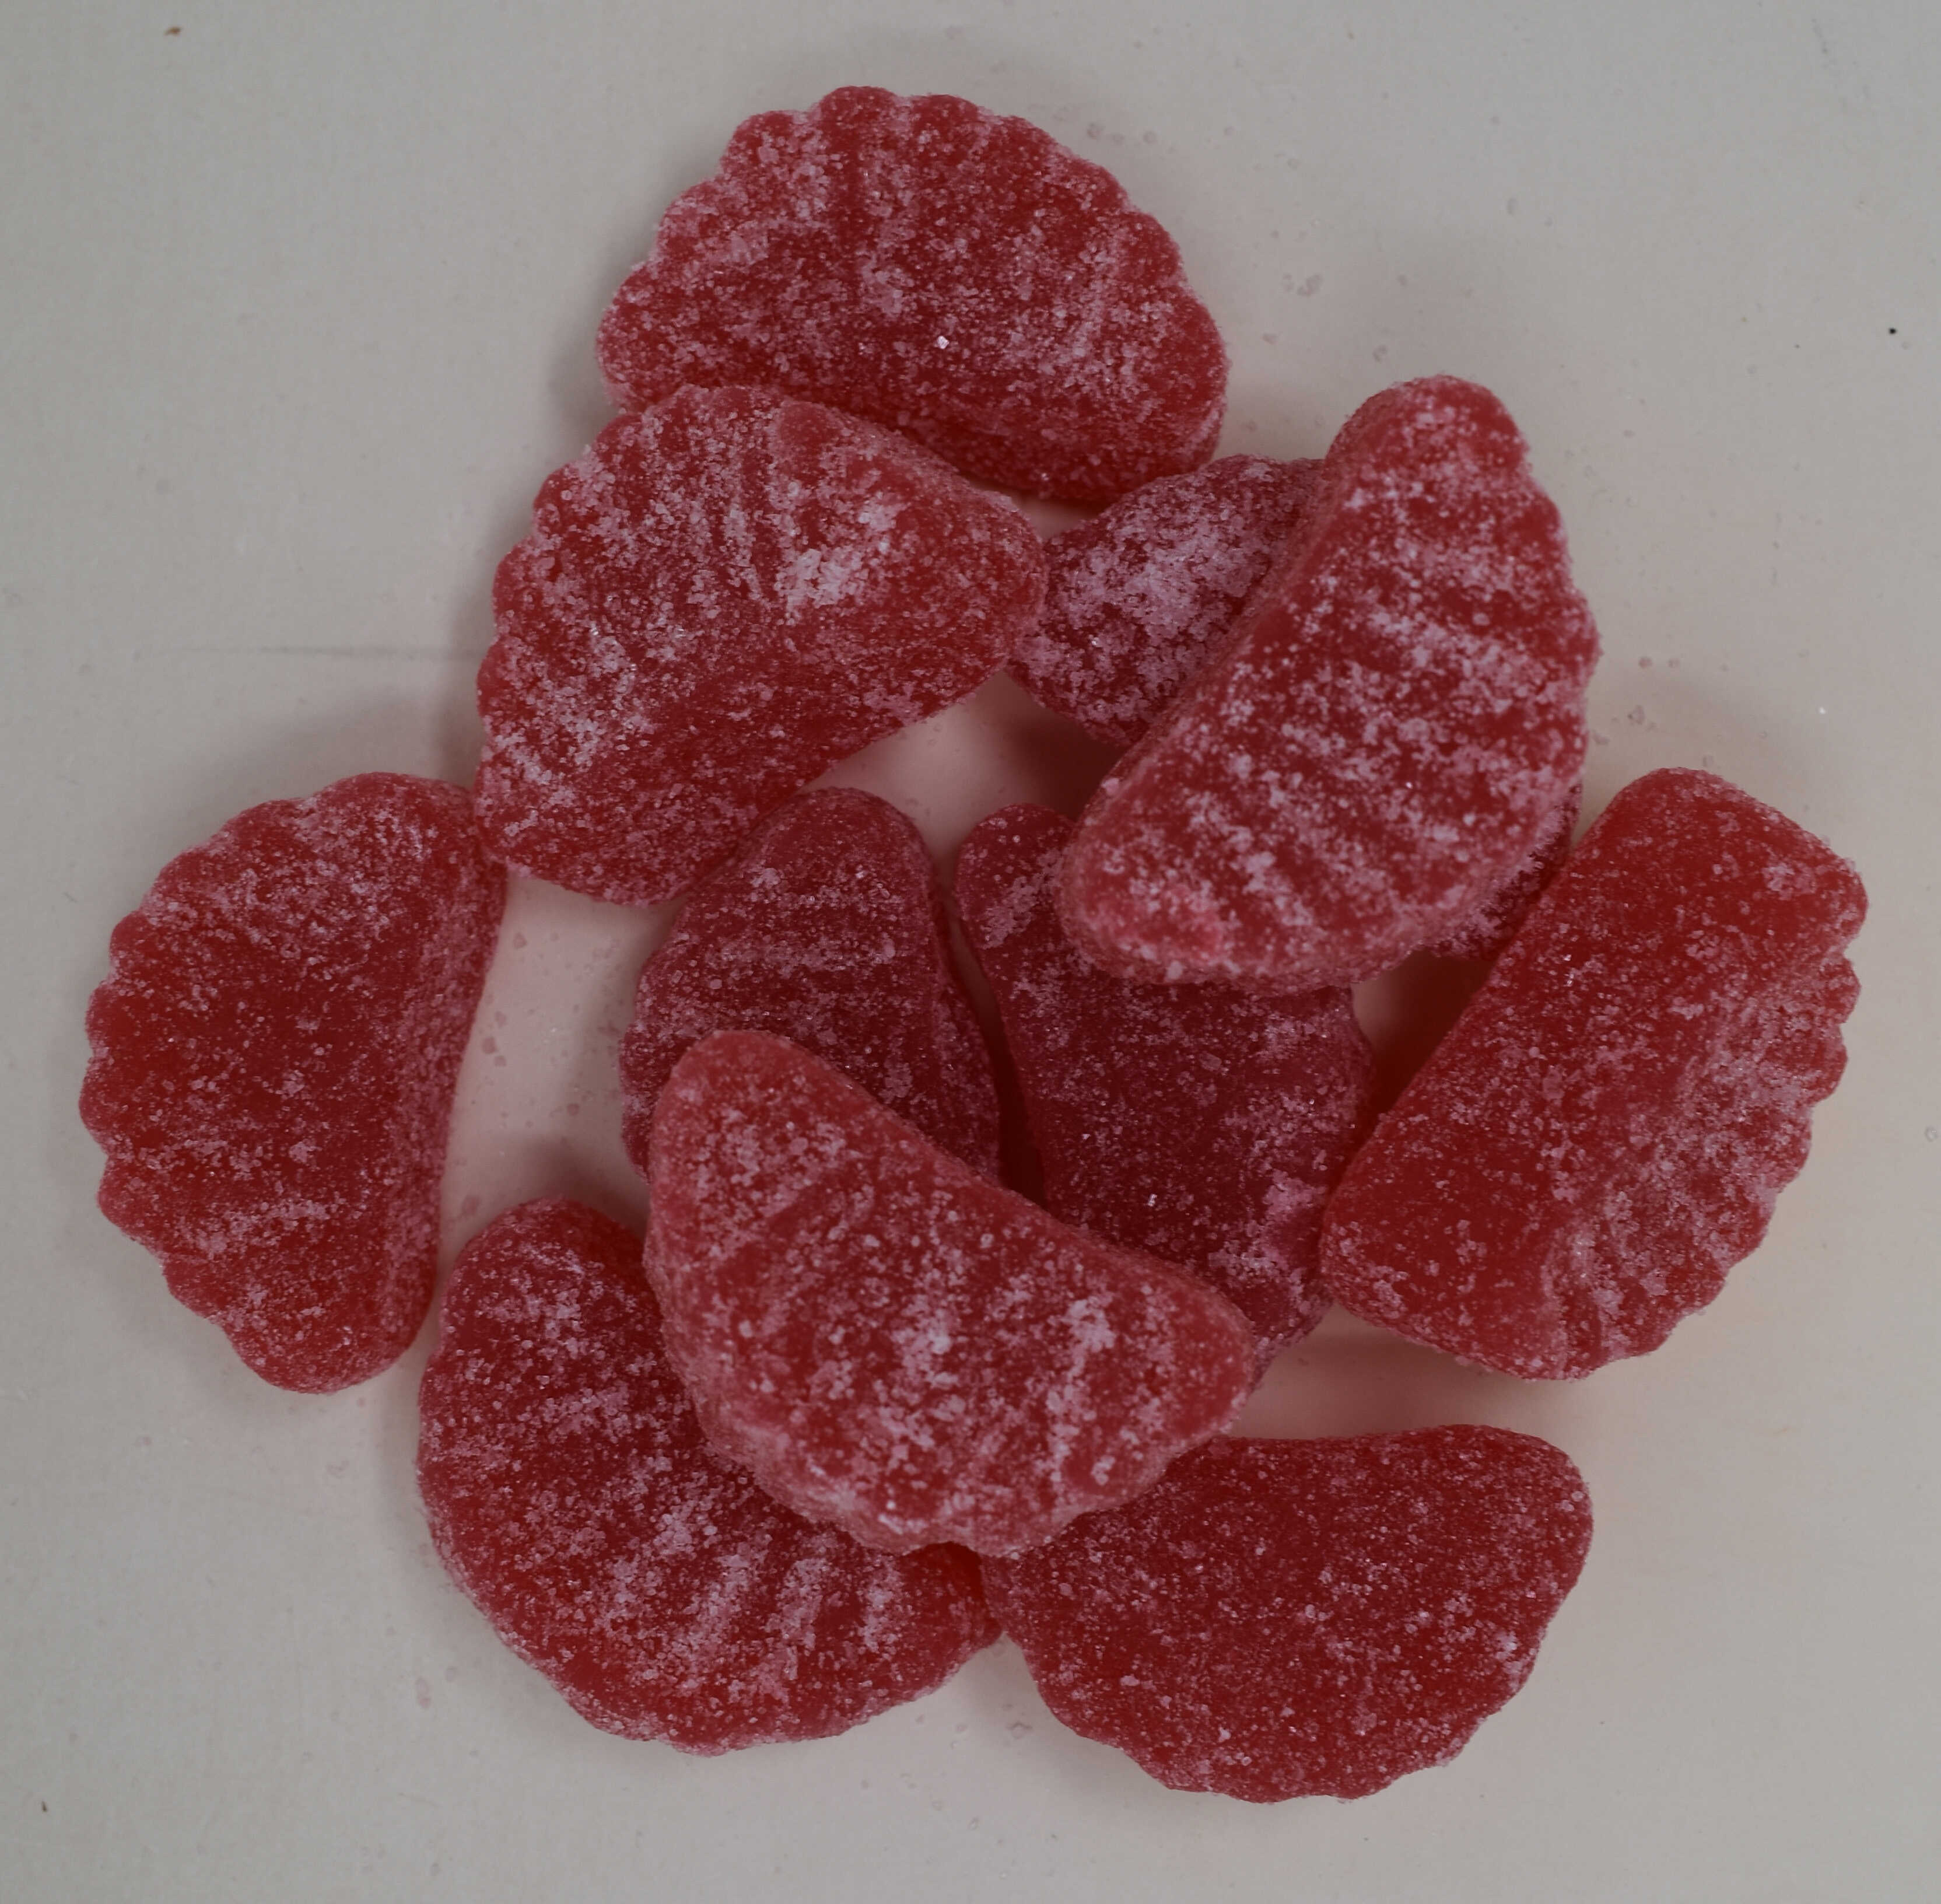 Cherry Fruit Slices Jelly Candy - Top Photo